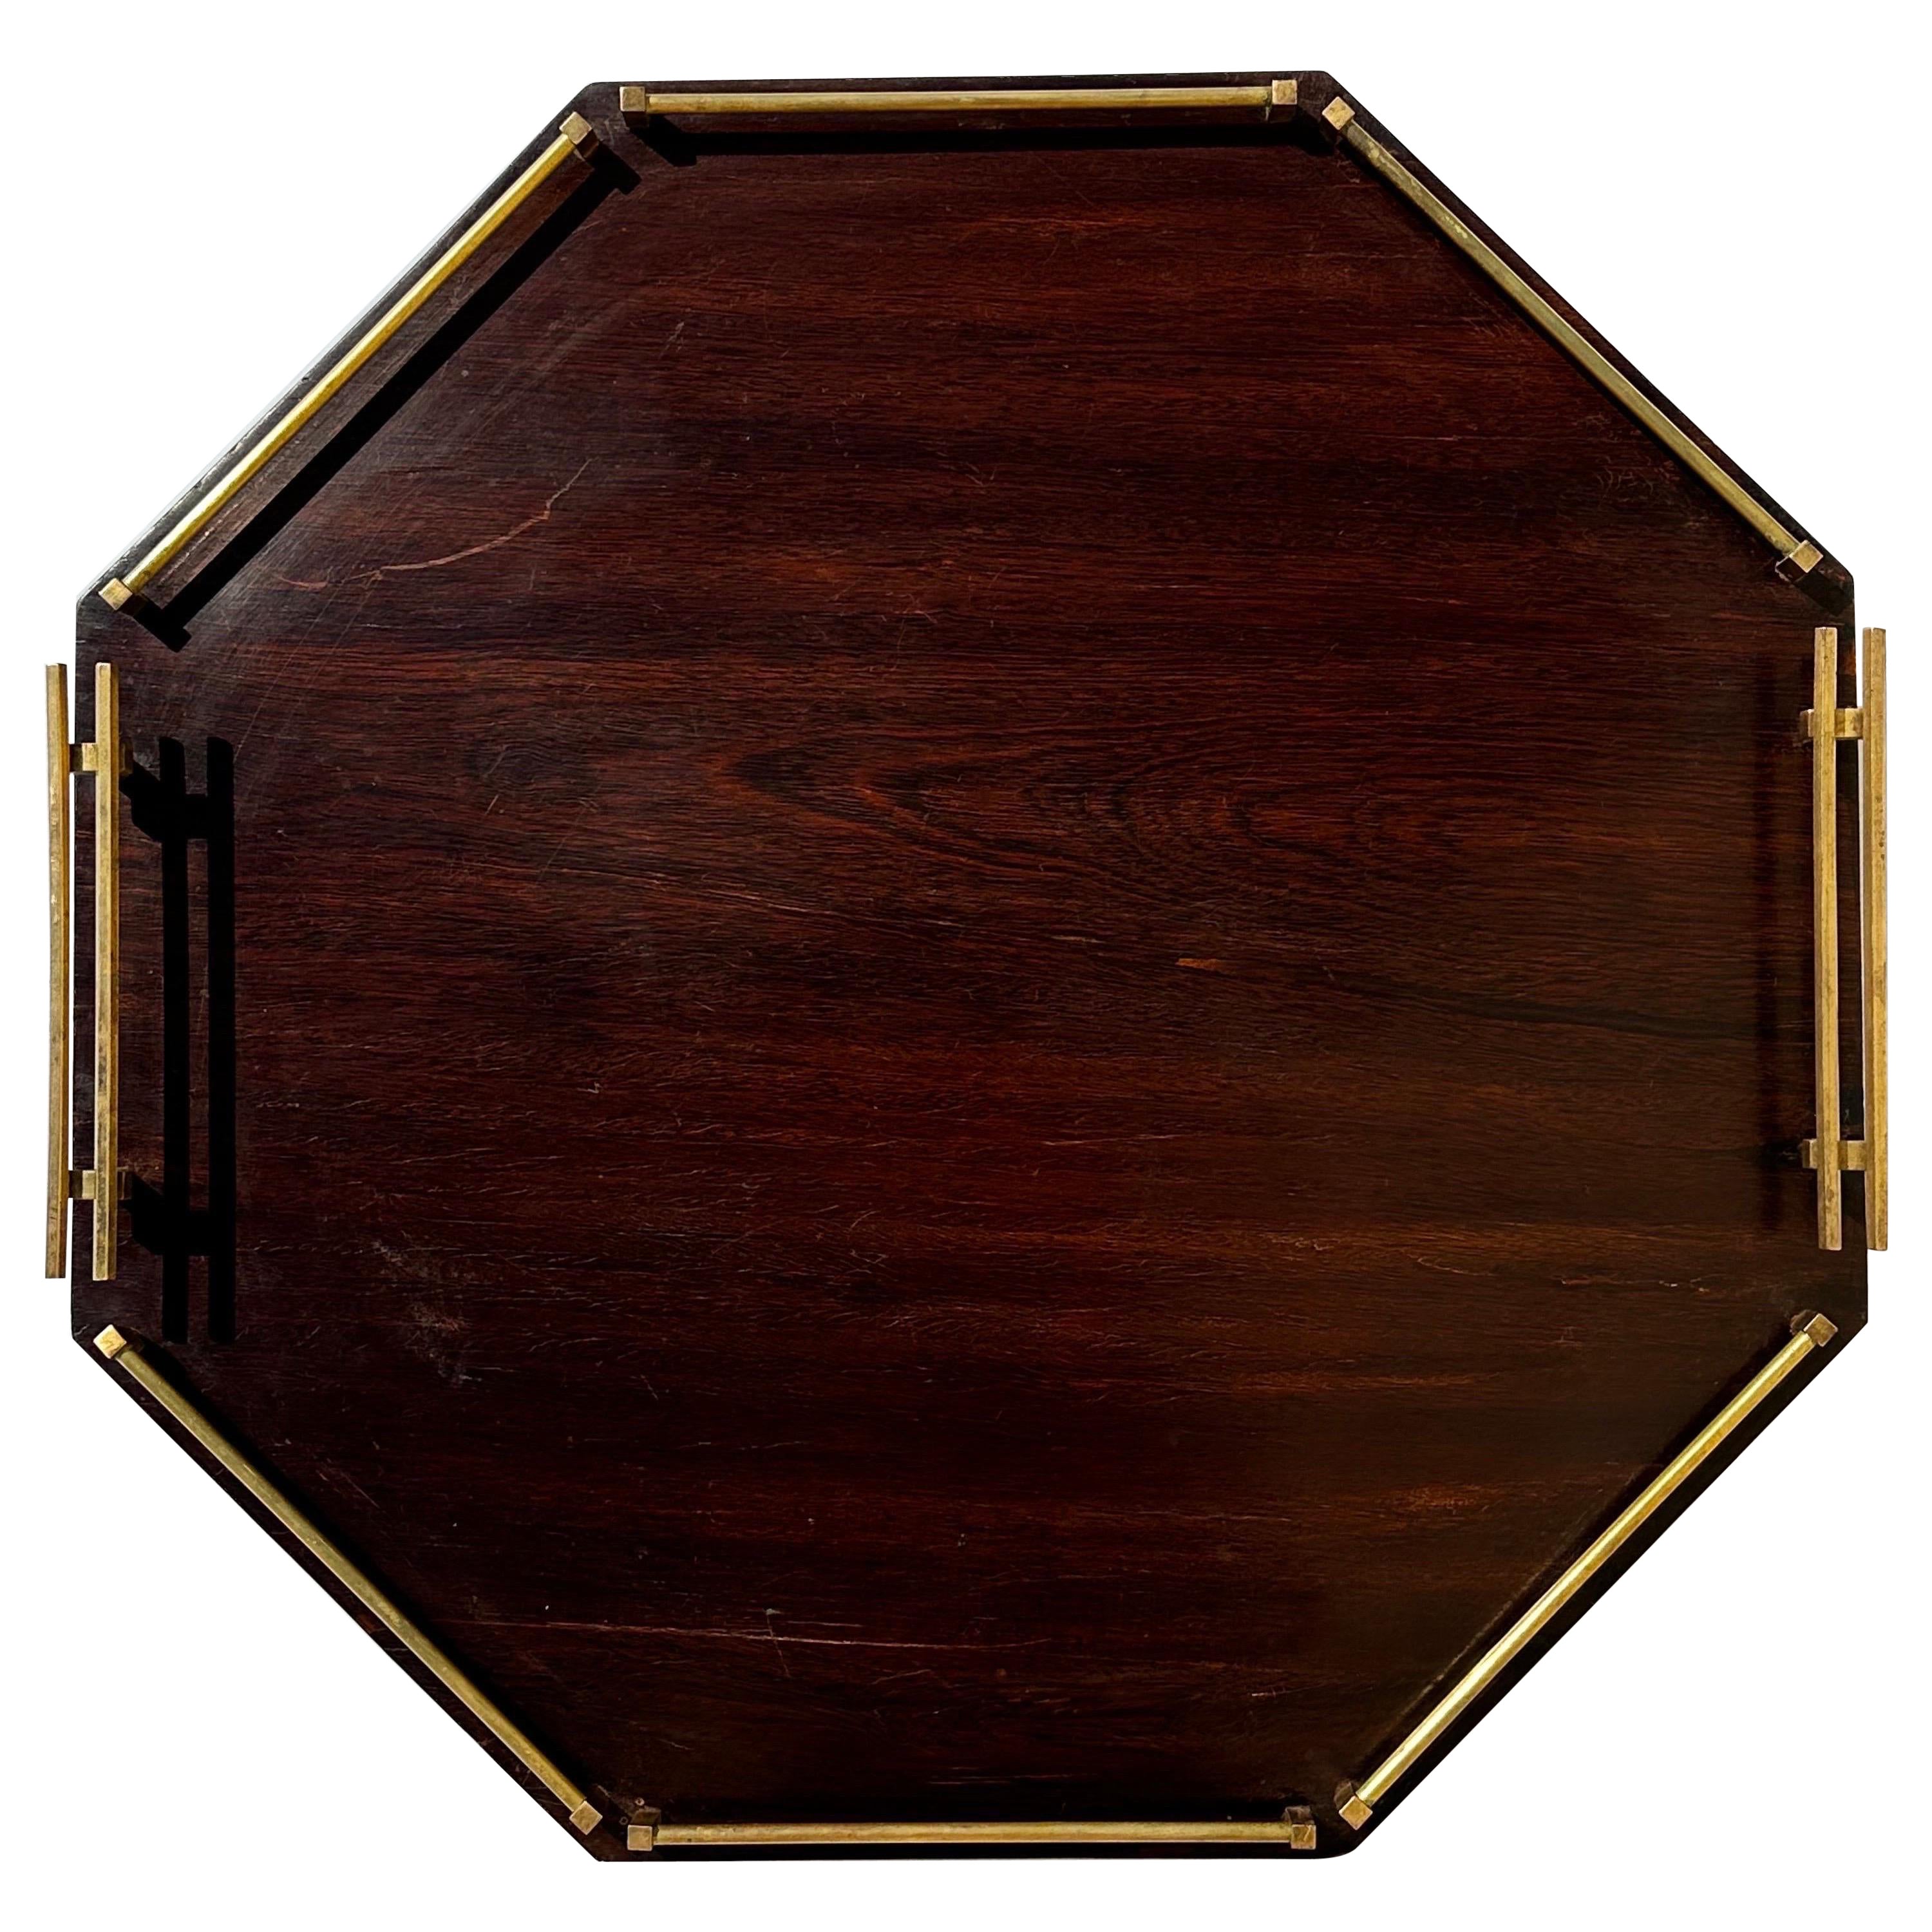 Brazilian Midcentury Jacarandá Rosewood and Brass Serving Tray, 1960s